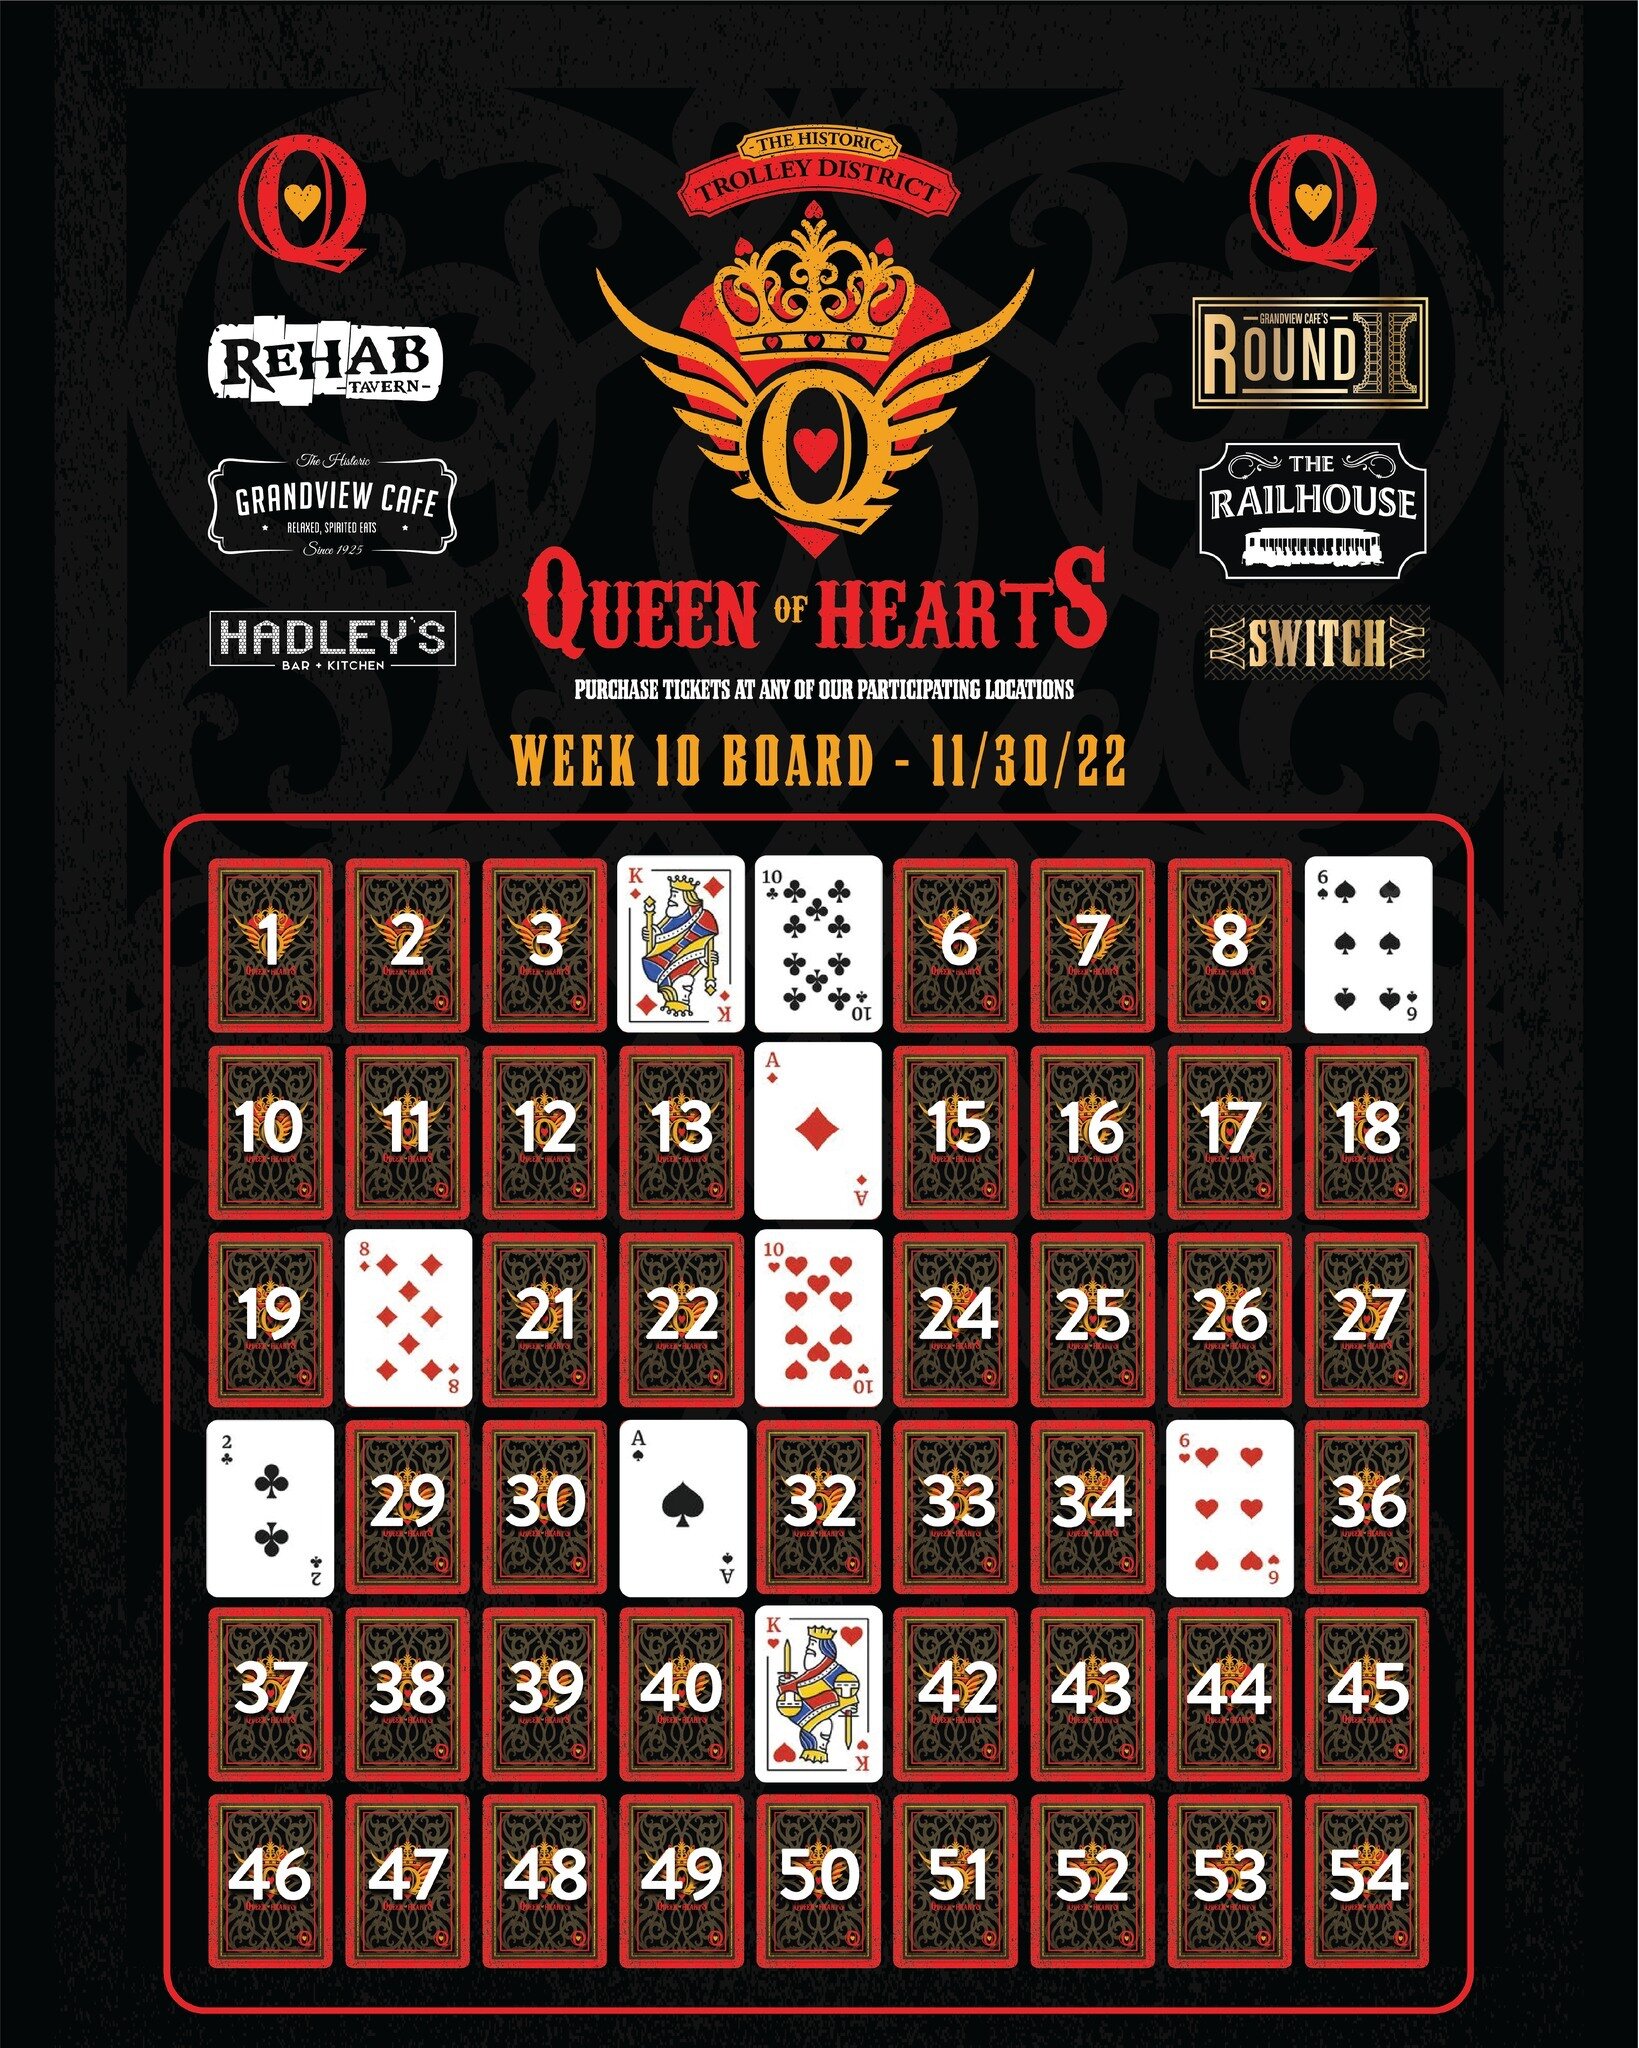 WEEK 10 - NO JACKPOT WINNER! | Week 10 is in the books! Last night card number 14 was turned over and found NOT to be the Queen Of Hearts. THE GAME GOES ON! Congrats to all of our drawing winners last night! 

The time to buy tickets for week 11 is n